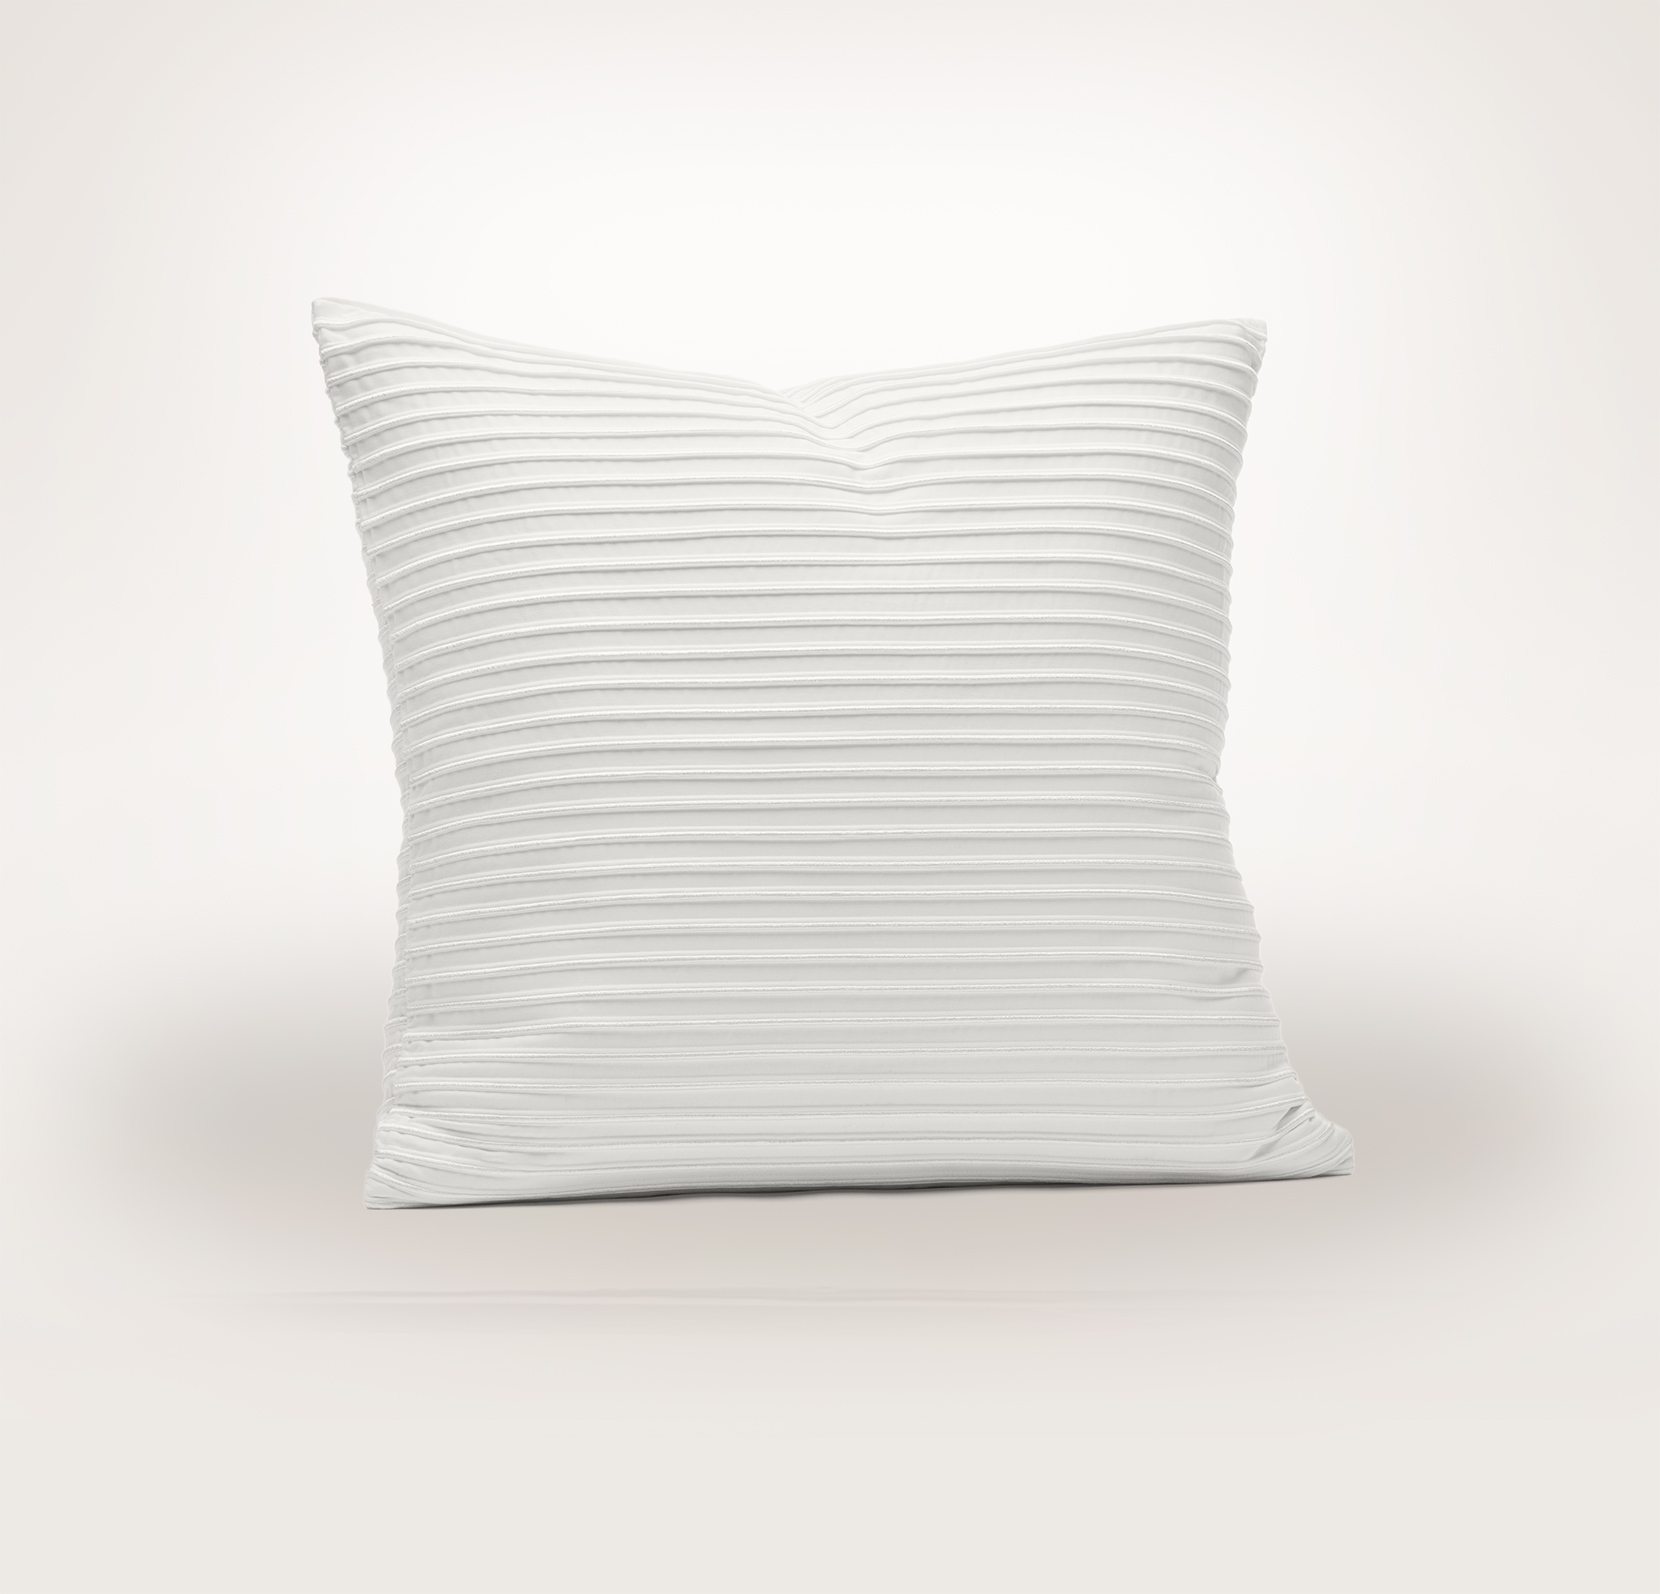 10242023_Snyder_White_Pintuck_Embroidered_DecPillow_Stack_Carousel_L1_FINAL_BB22.jpg Pintuck Embroidery Pillow Cover - Slide 1